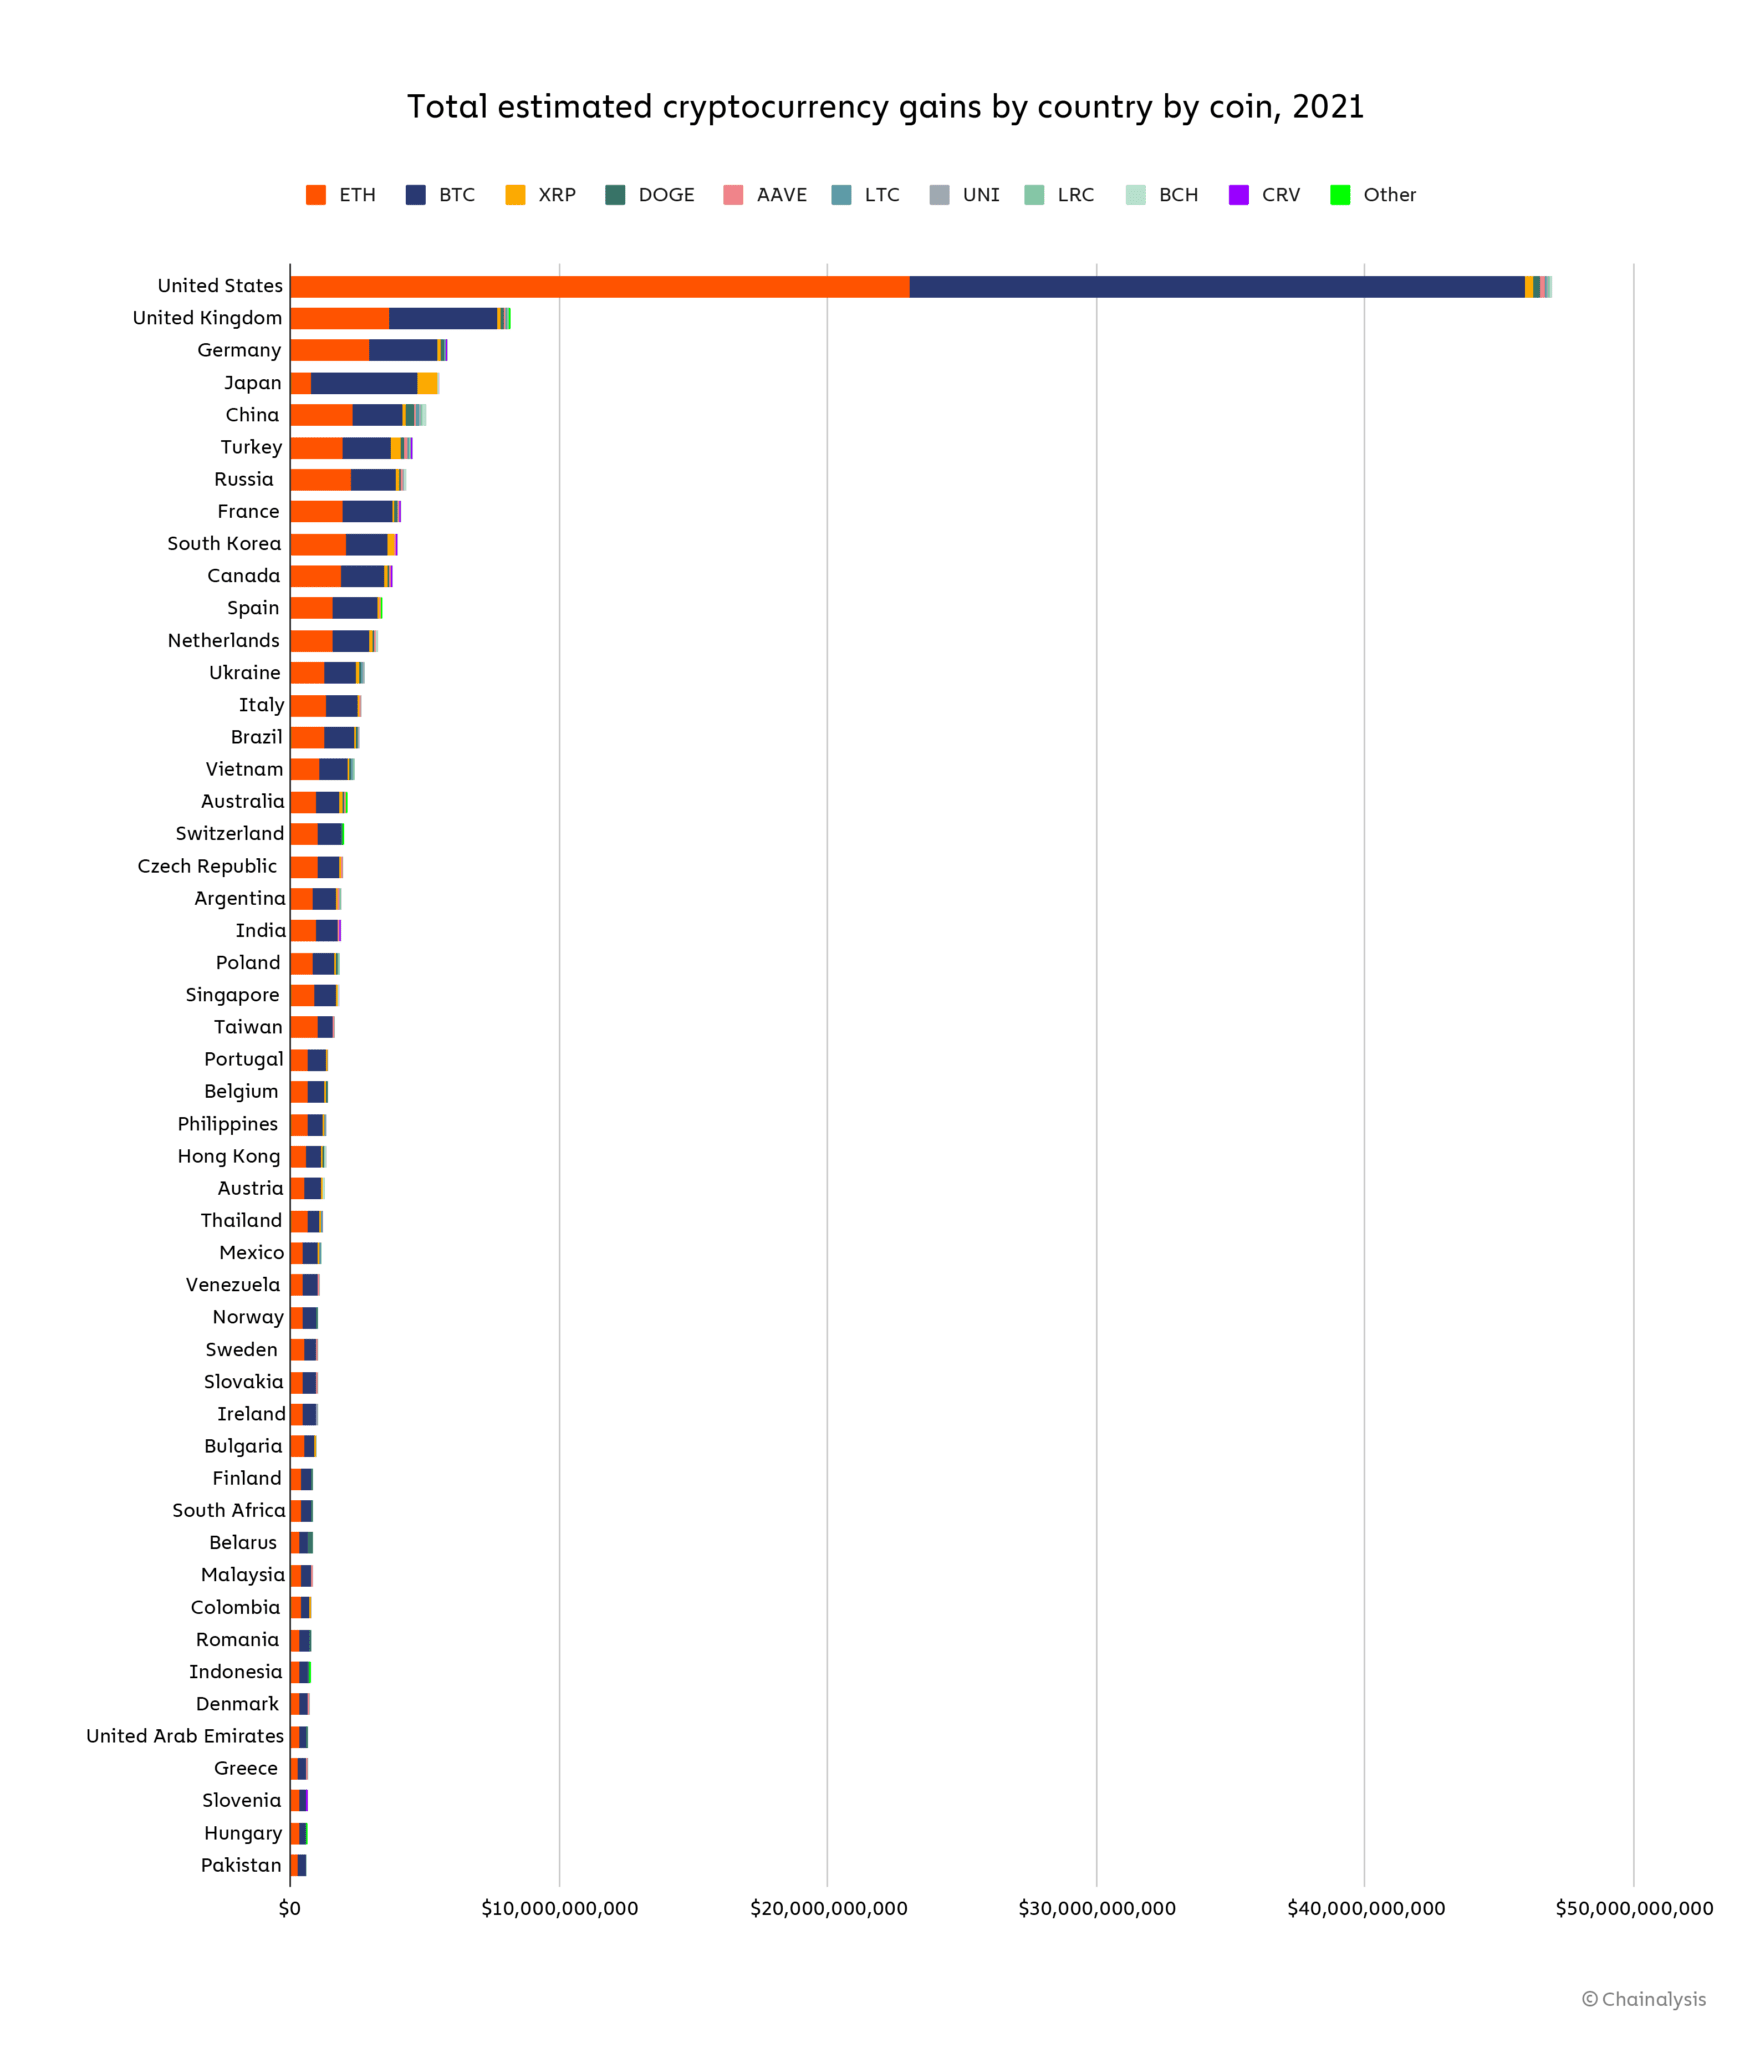 Total estimated cryptocurrency gains by country by coin in 2021 (Chainalysis)